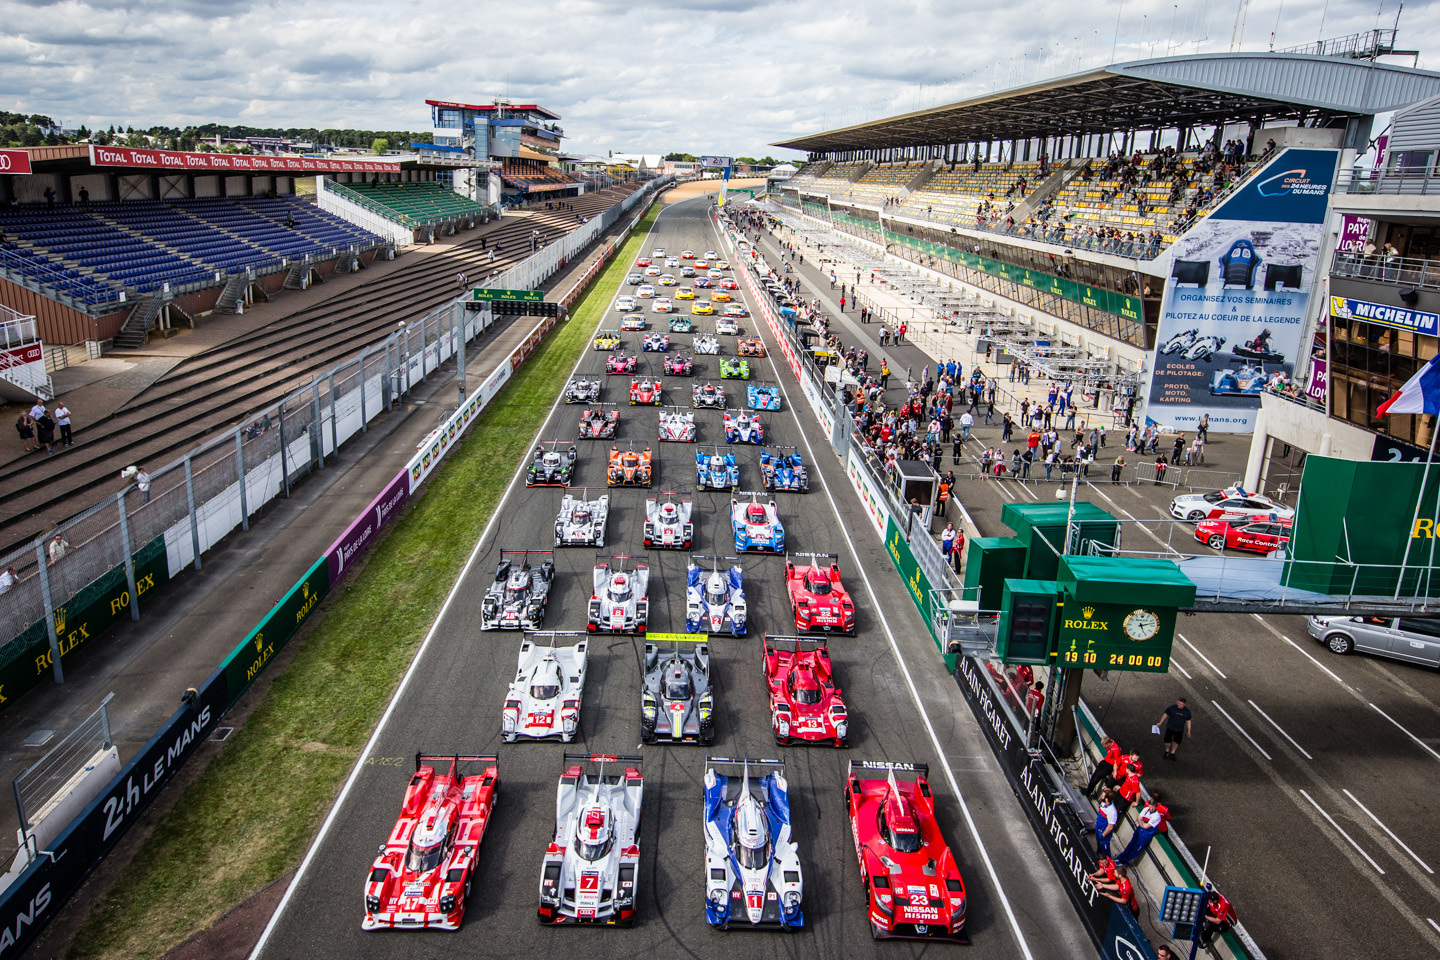 Motorsport to Host Live Streaming of Le Mans 24 Hours Entry List Press Conference on February 5th Business Wire